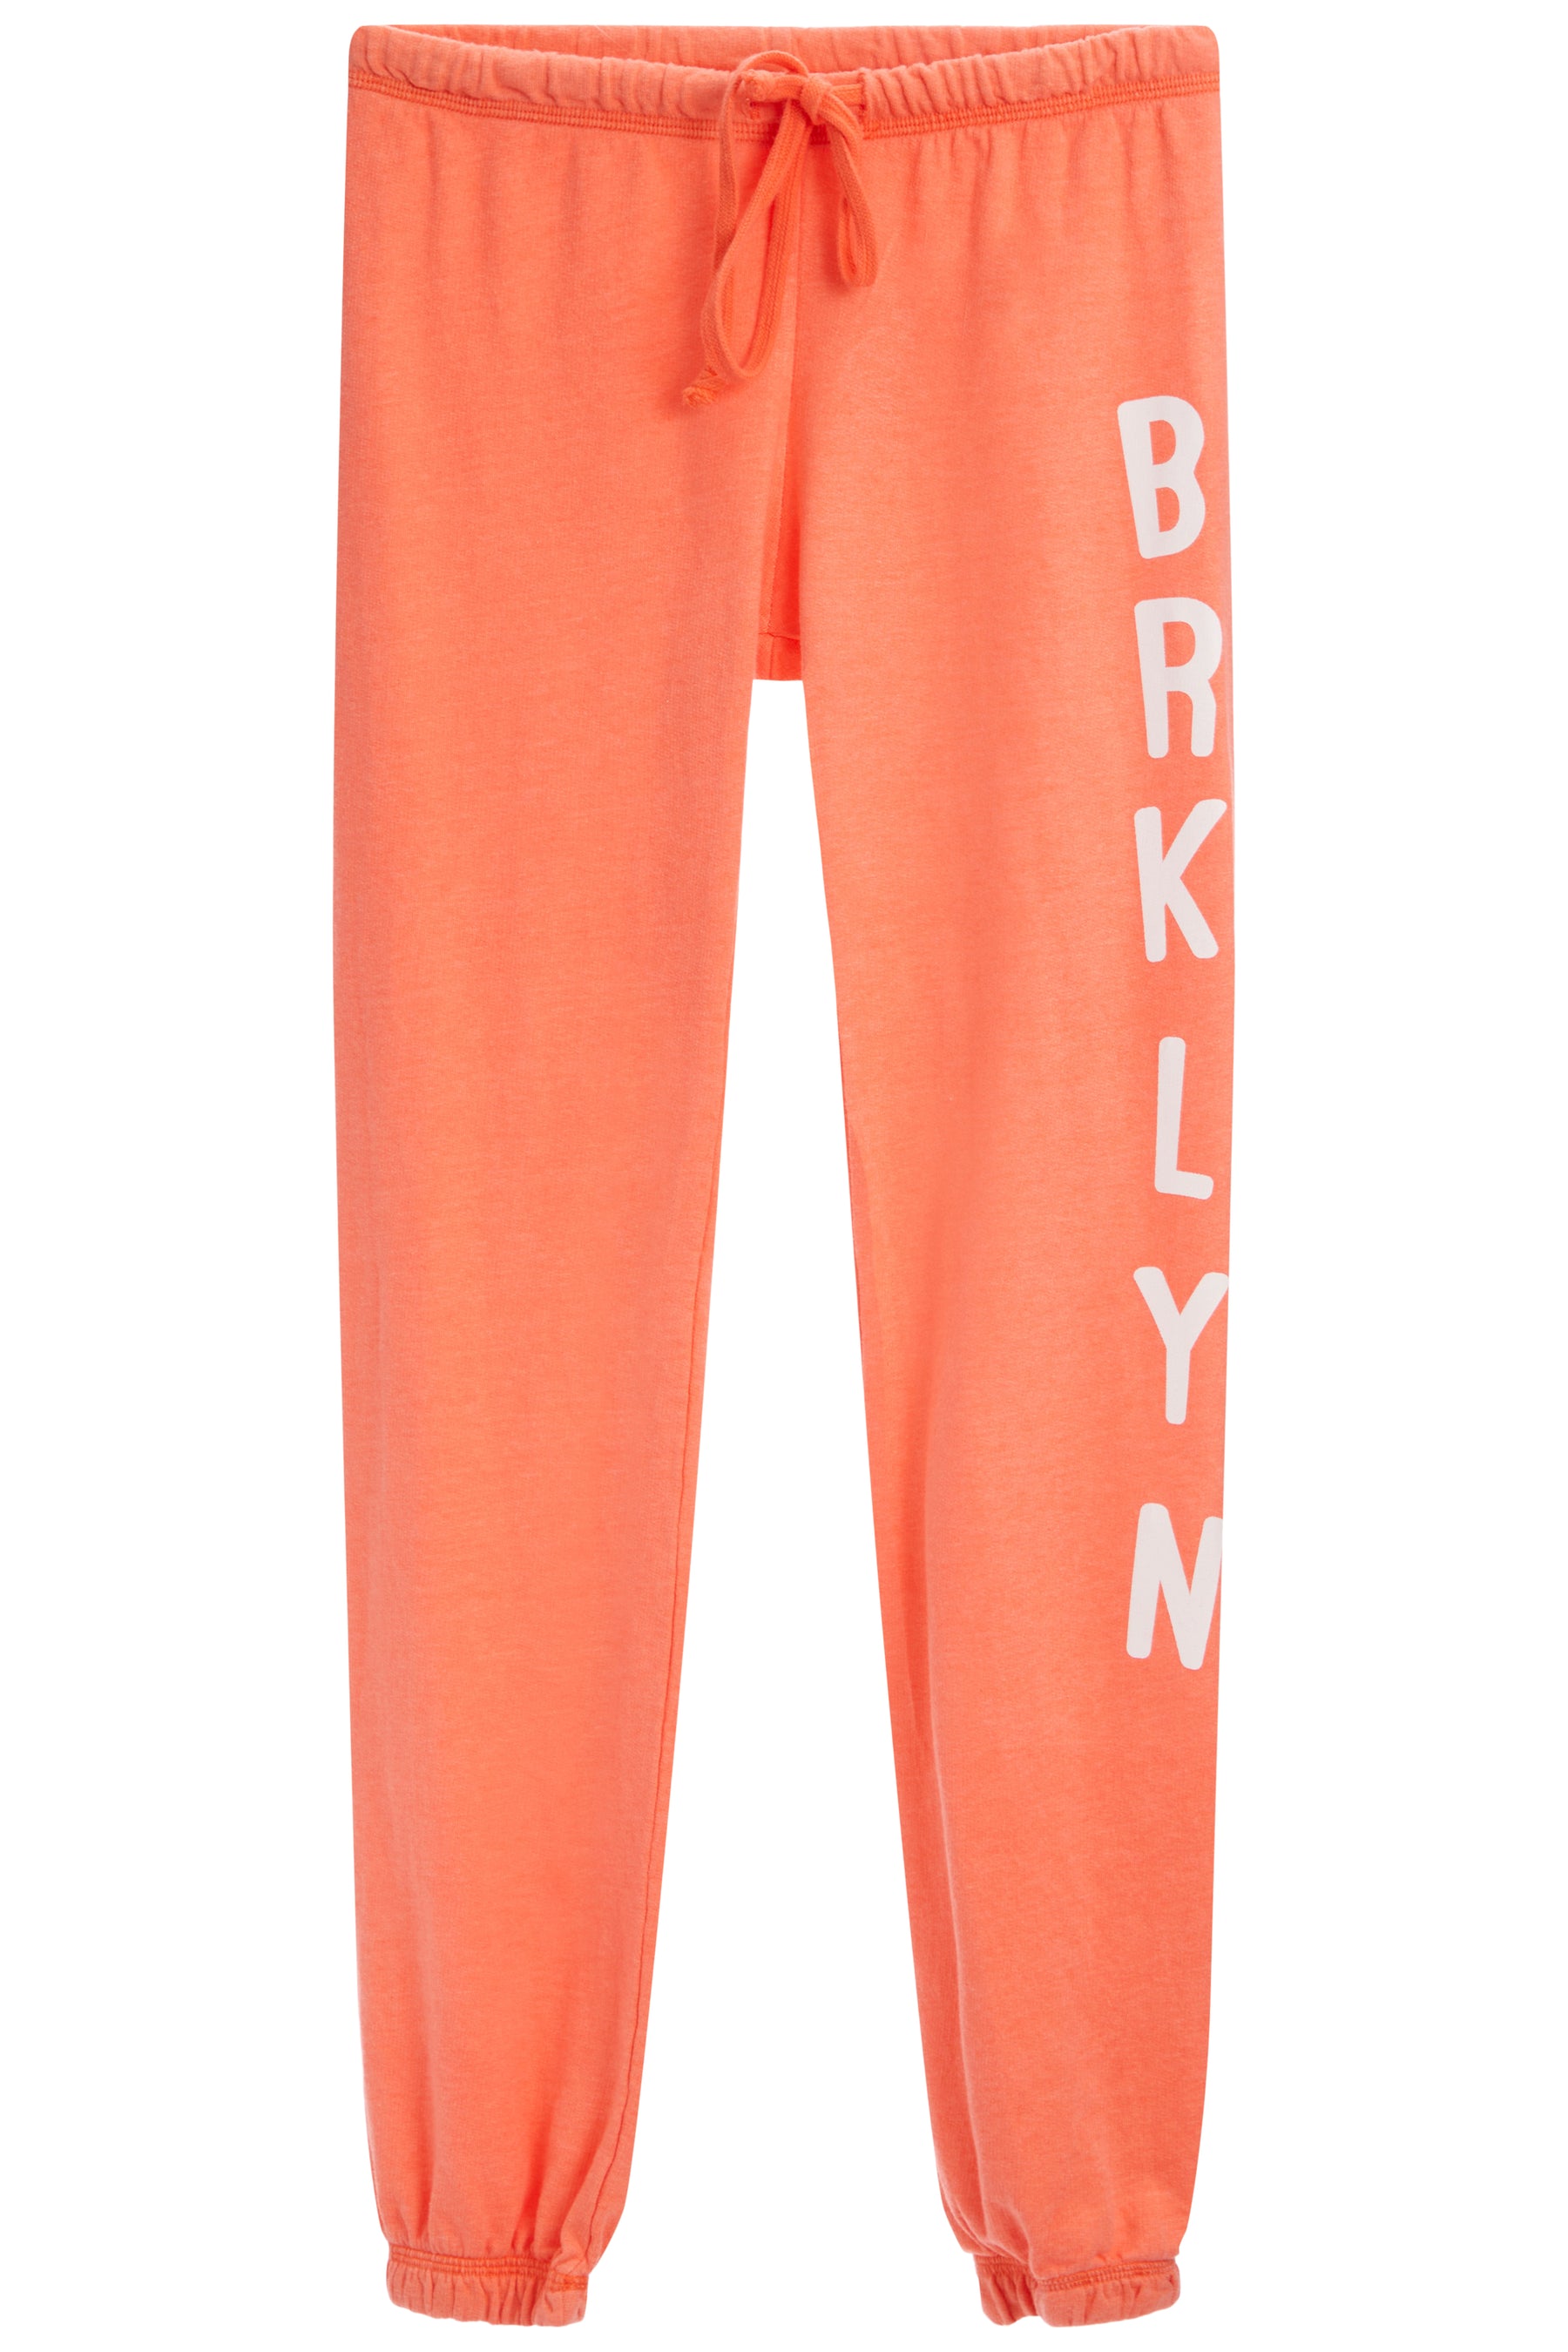 BRKLYN New York French Terry Jogger